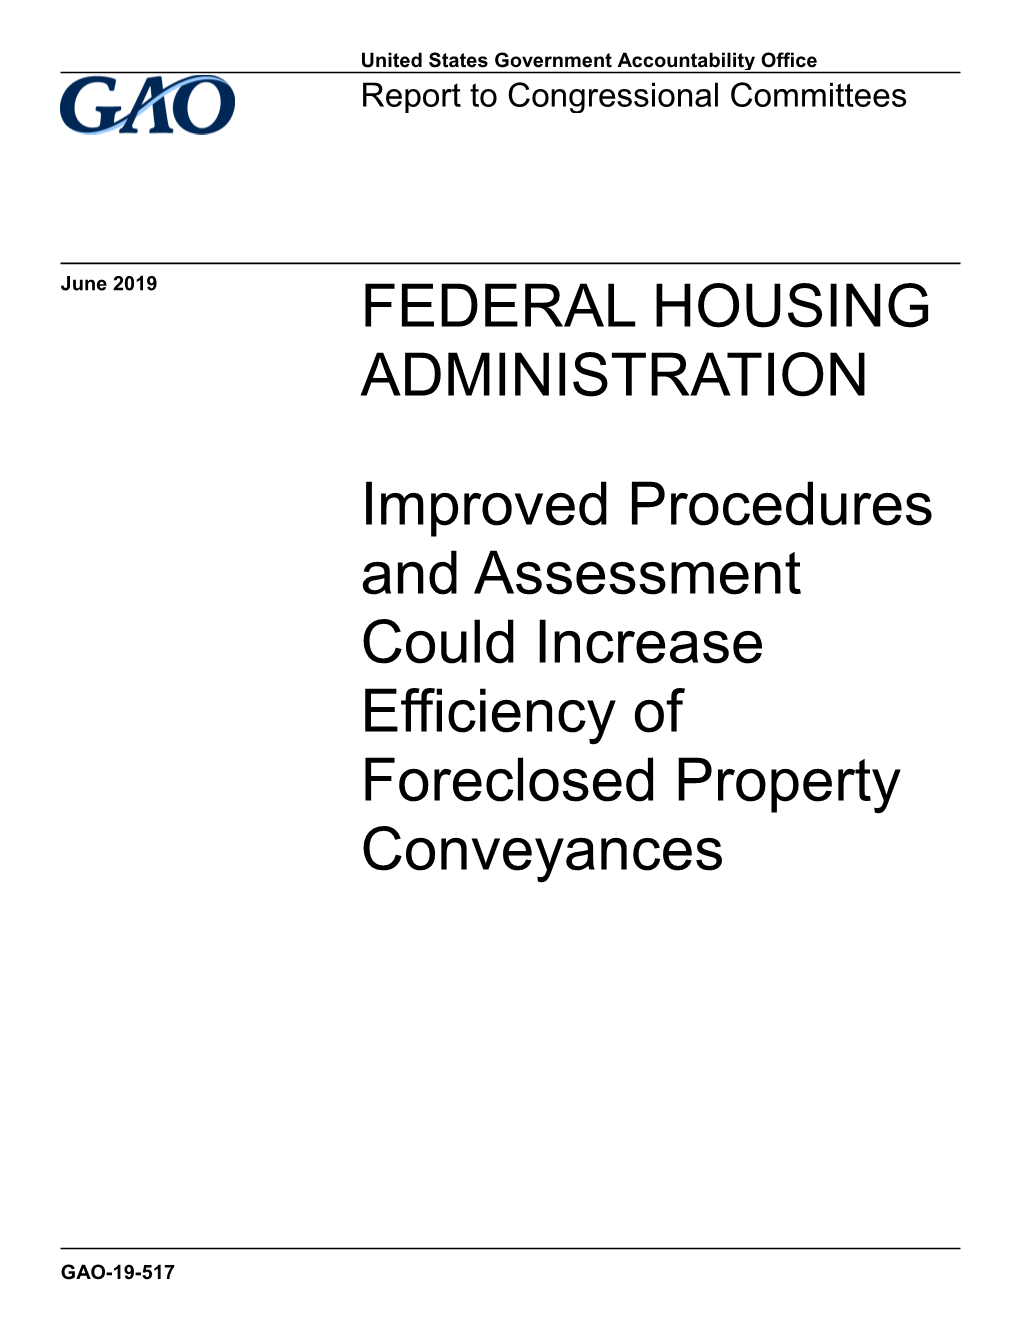 Gao-19-517, Federal Housing Administration